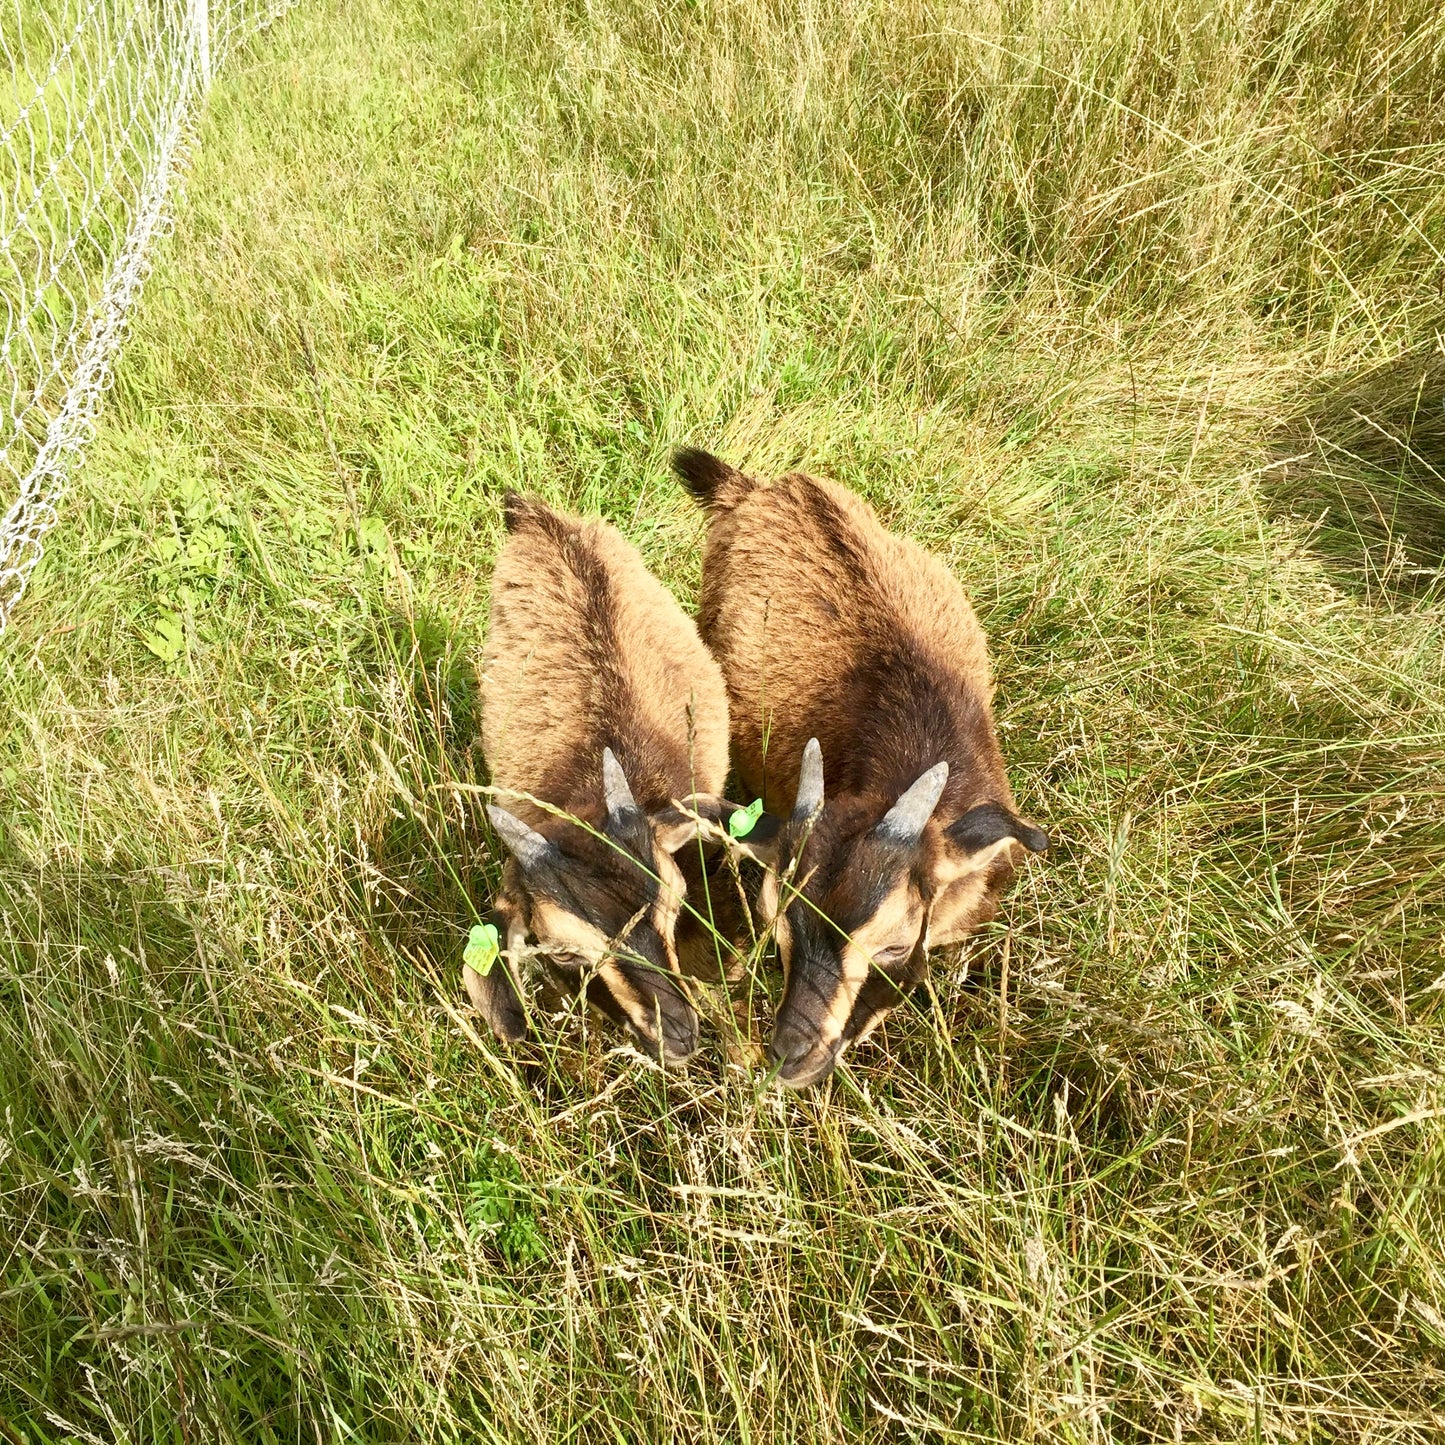 san clemente island goat, sci goat, pure sci goat, san clemene island goats for sale, goats for sale, wisconsin goats, wisconsin san clemente island goats, rare breed goat, critically endangered goat, eb ranch farmstead